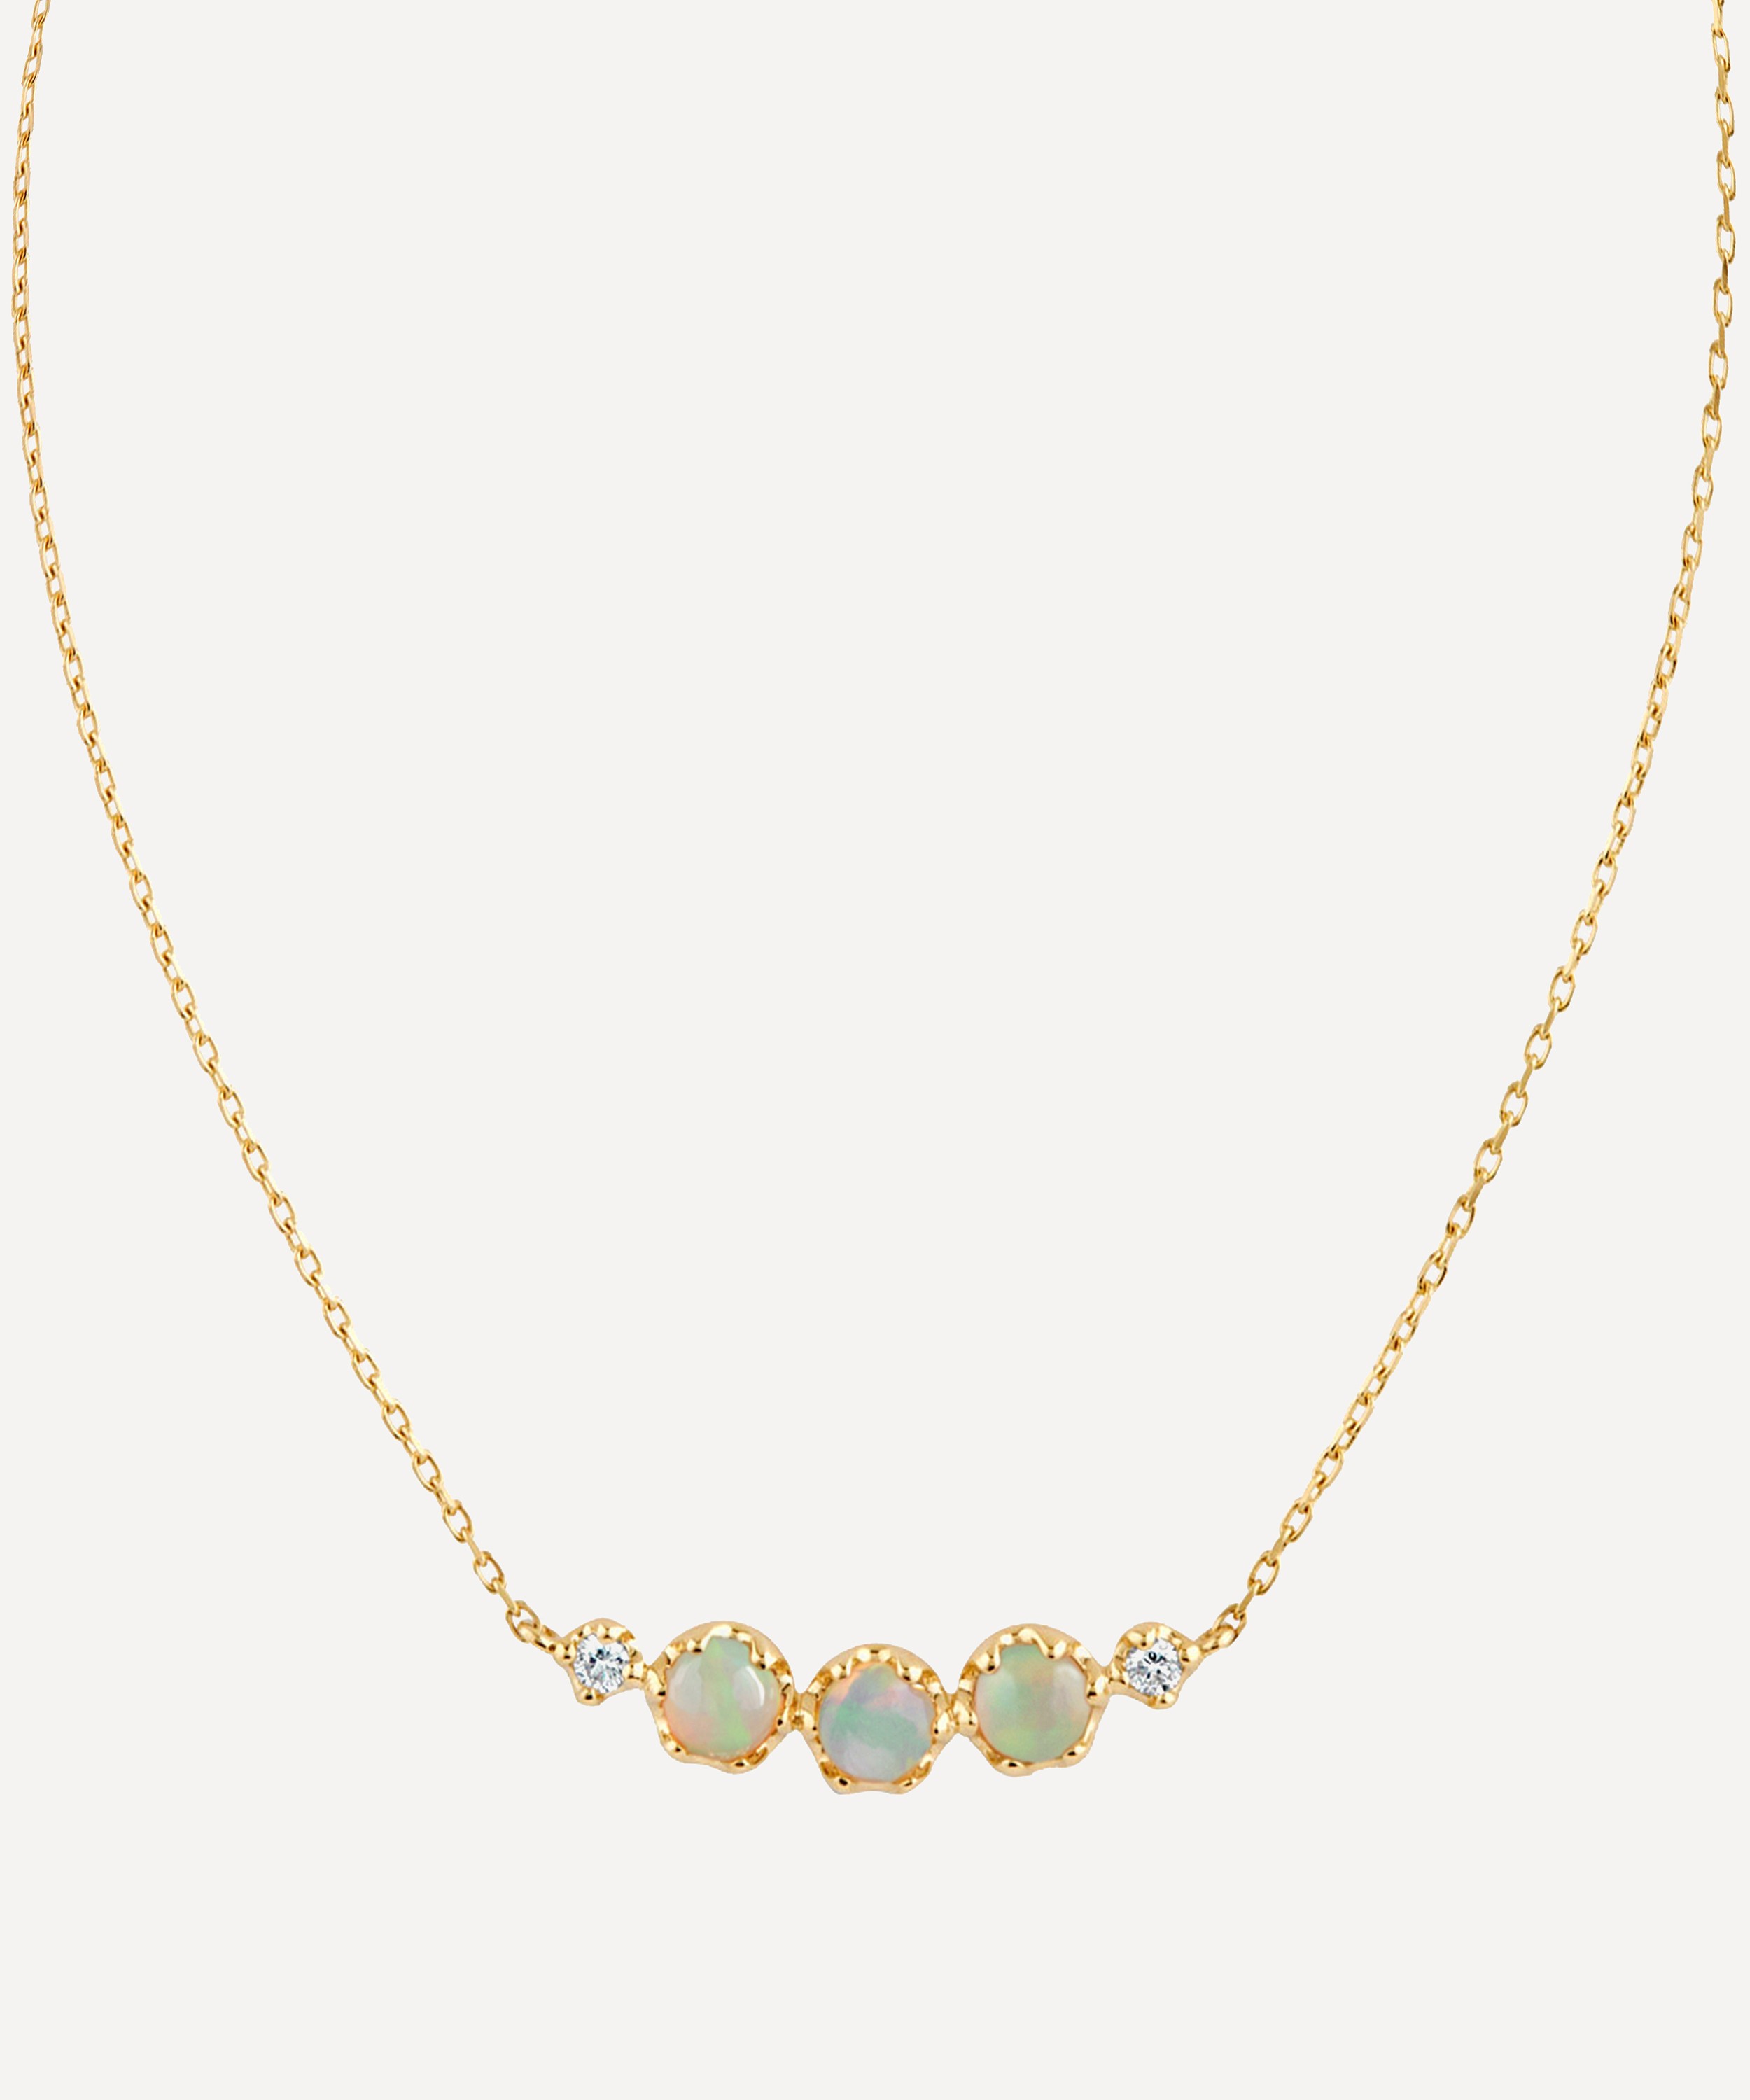 Dinny Hall Jewellery | Earrings and Necklaces | Liberty